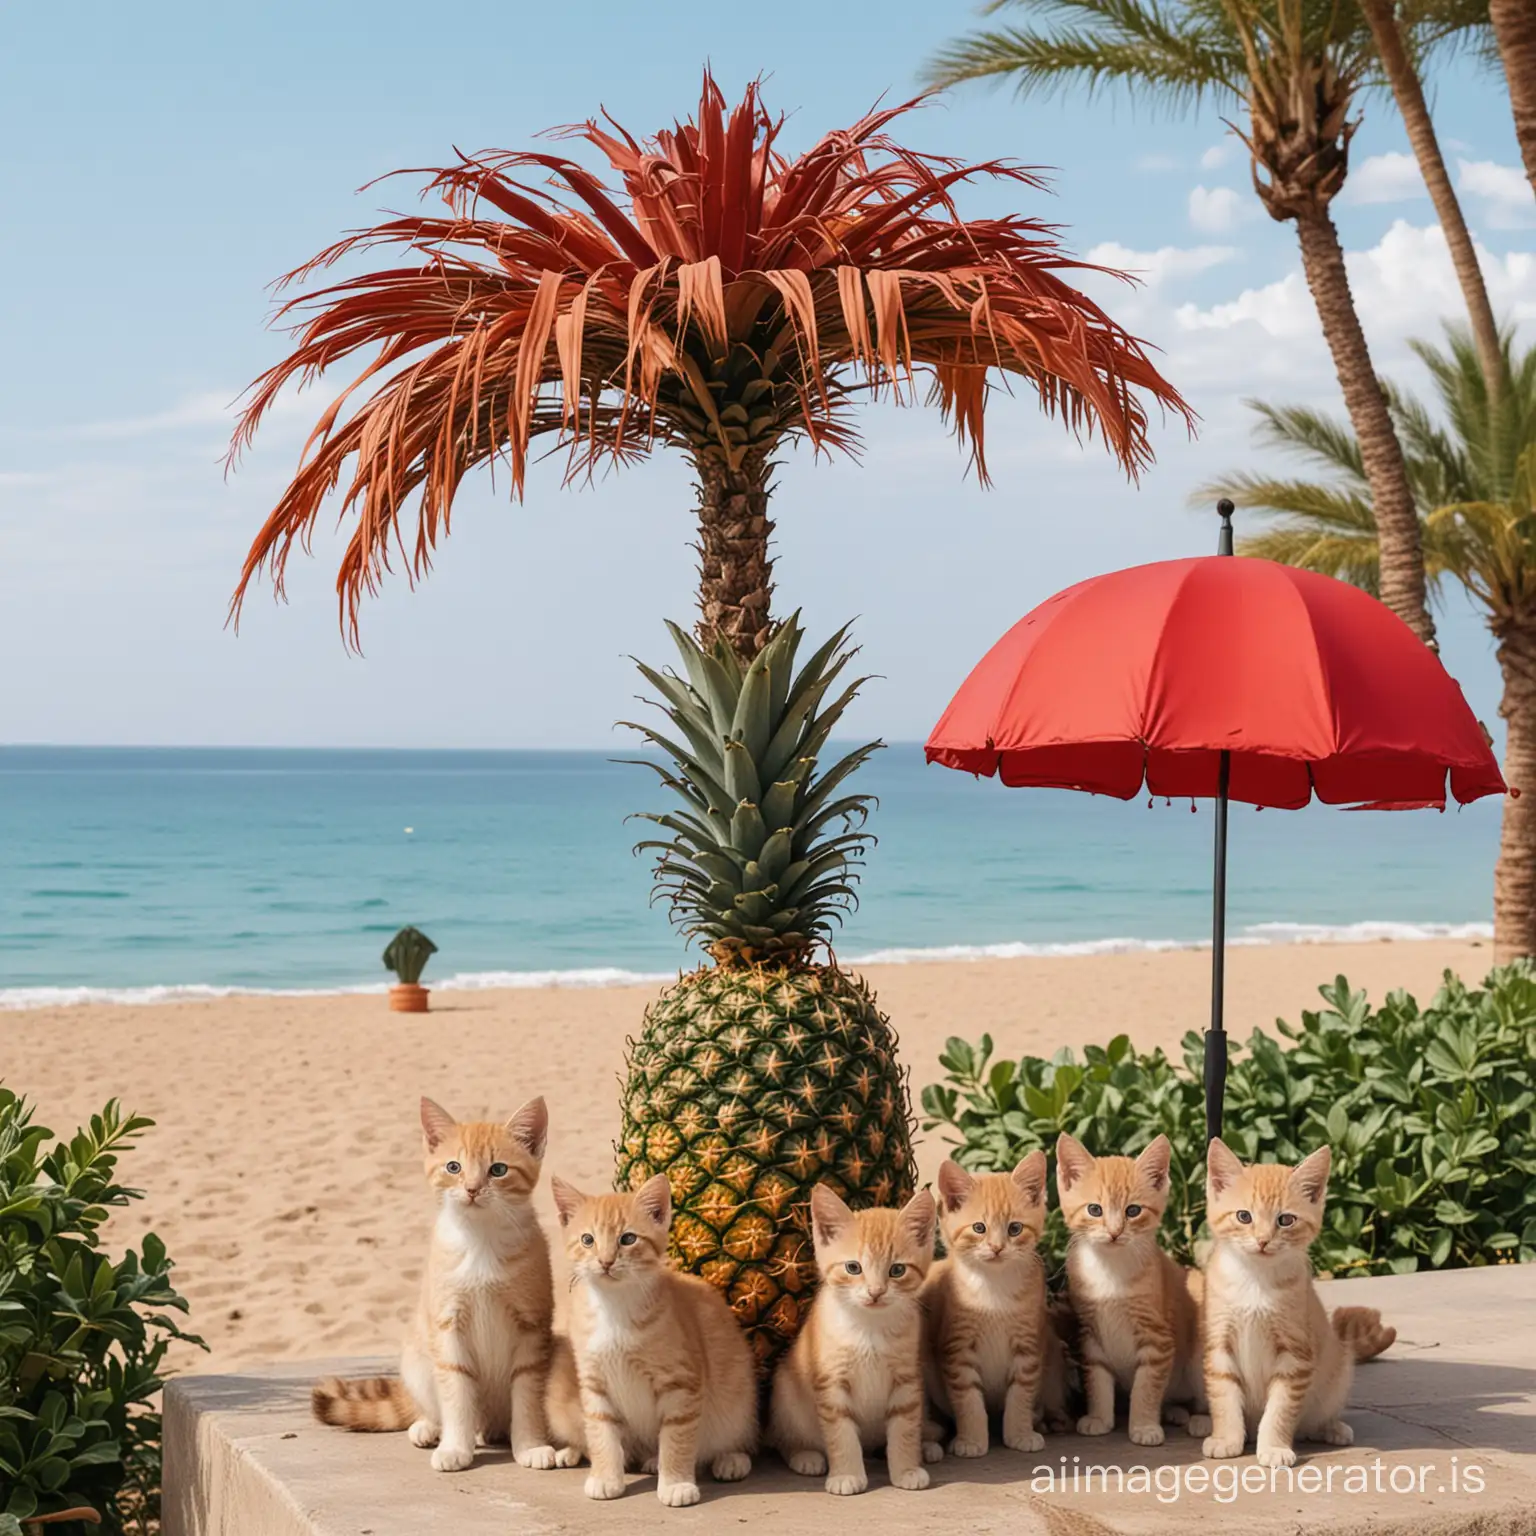 Iron pineapple against the backdrop of the red sea with a crowd of little kittens with umbrellas